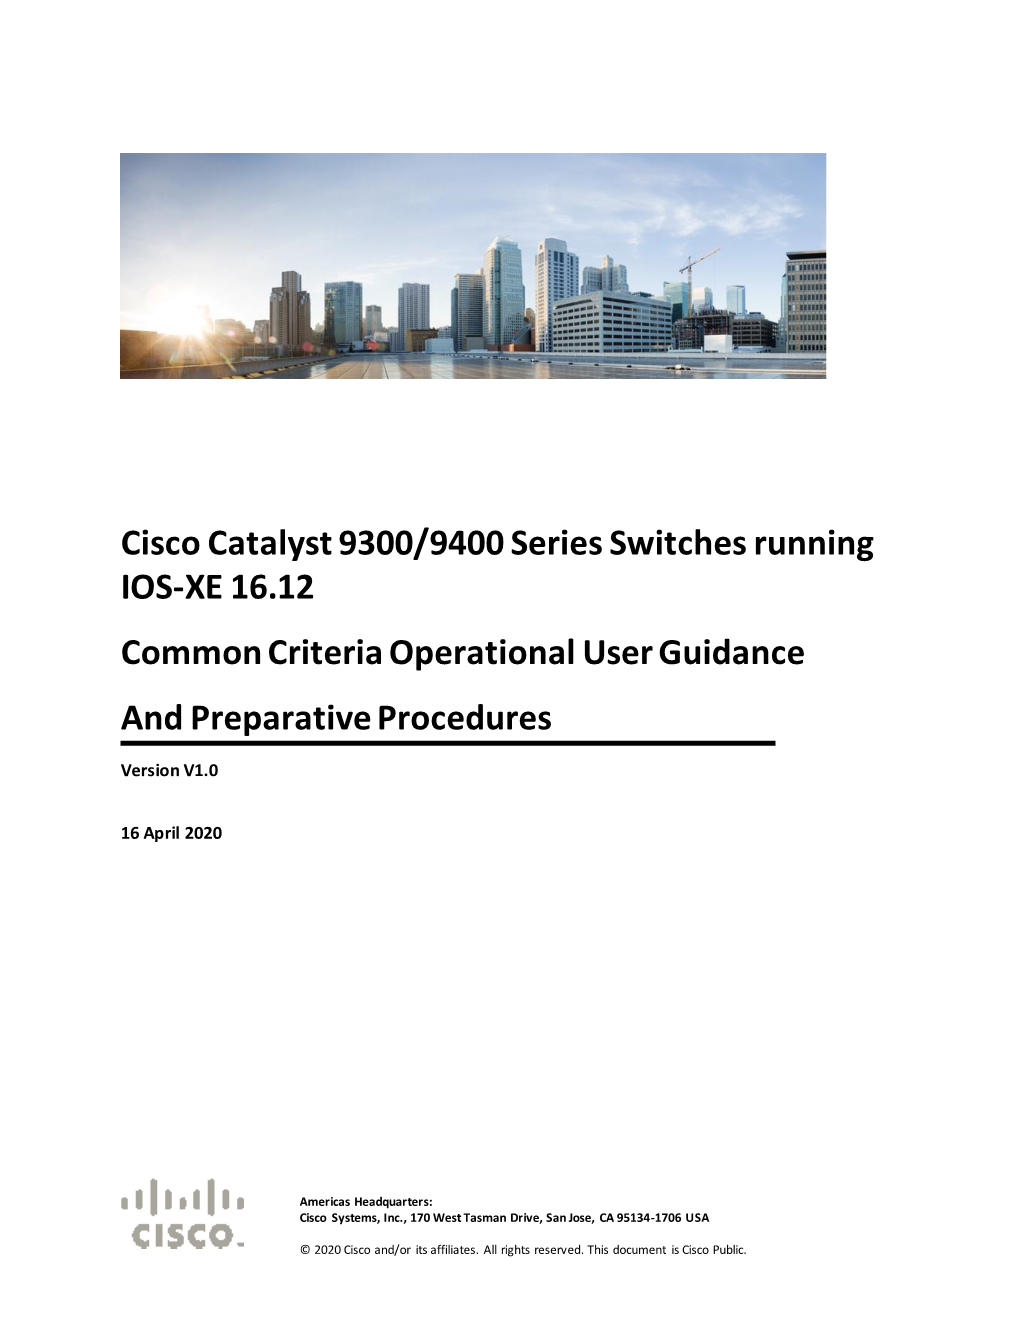 Cisco Catalyst 9300/9400 Series Switches Running IOS-XE 16.12 Common Criteria Operational User Guidance